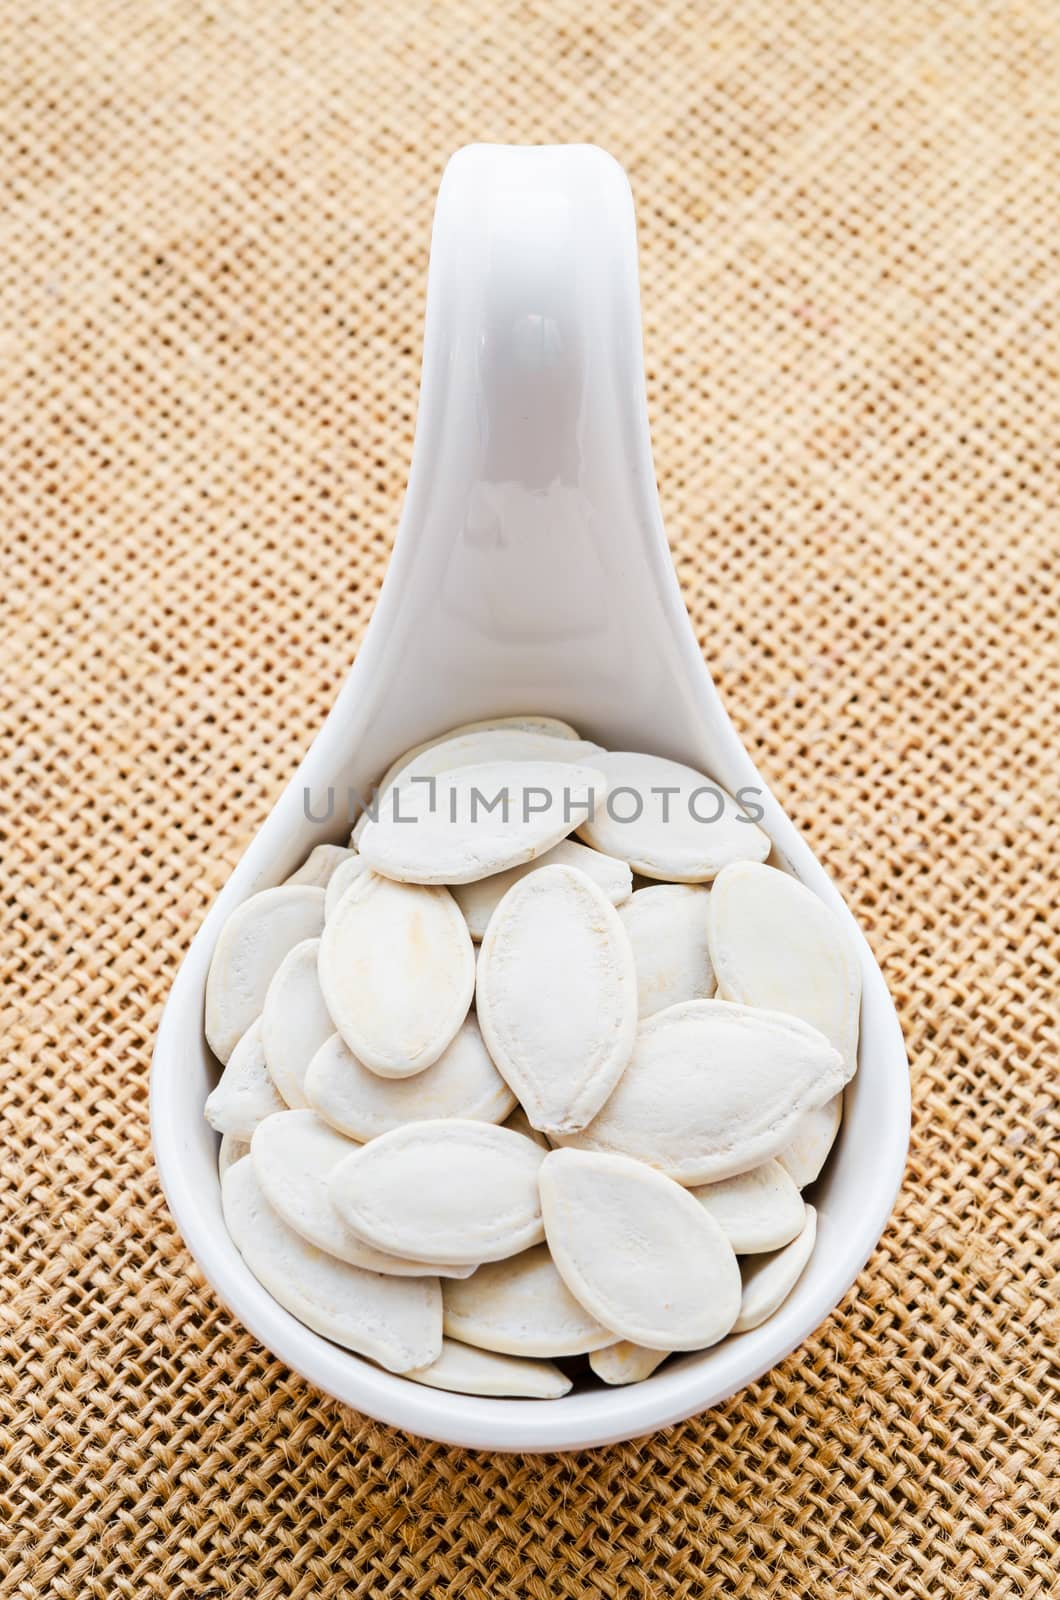 Pumpkin seeds in a white spoon on sack background.